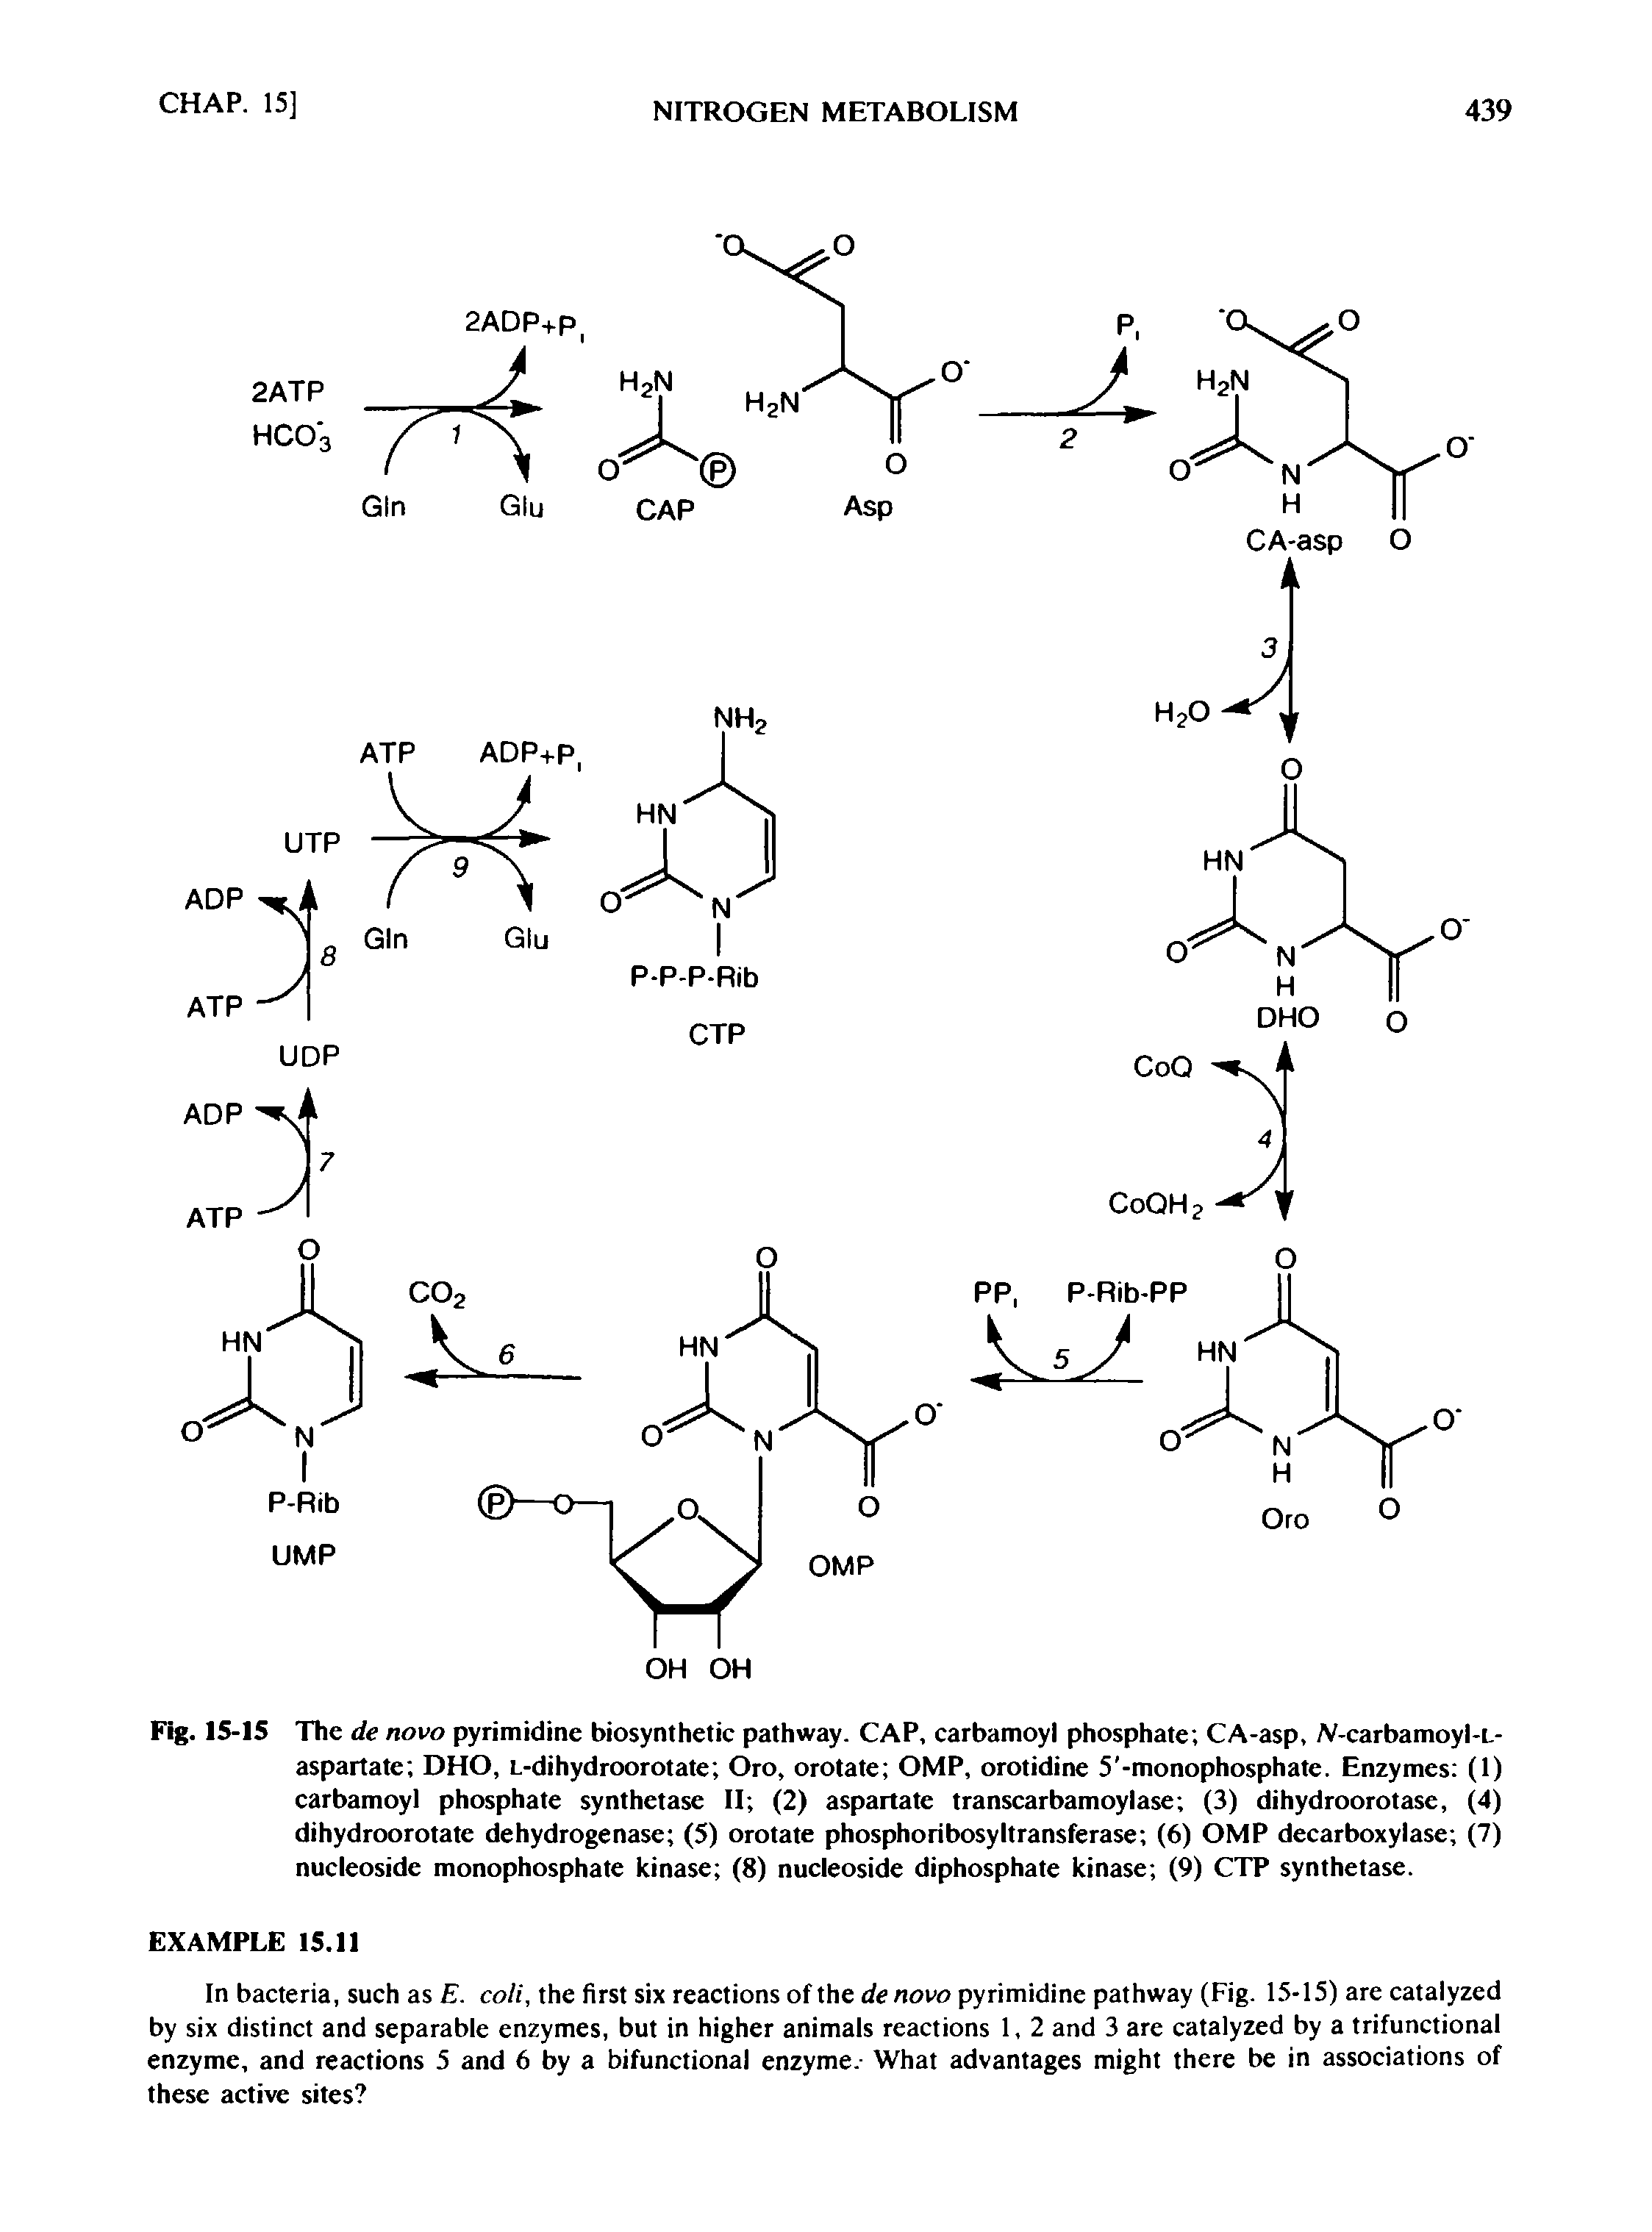 Fig. 15-15 The de novo pyrimidine biosynthetic pathway. CAP, carbamoyl phosphate CA-asp, /V-carbamoyl-L-aspartate DHO, L-dihydroorotate Oro, orotate OMP, orotidine 5 -monophosphate. Enzymes (1) carbamoyl phosphate synthetase II (2) aspartate transcarbamoylase (3) dihydroorotase, (4) dihydroorotate dehydrogenase (5) orotate phosphoribosyltransferase (6) OMP decarboxylase (7) nucleoside monophosphate kinase (8) nucleoside diphosphate kinase (9) CTP synthetase.